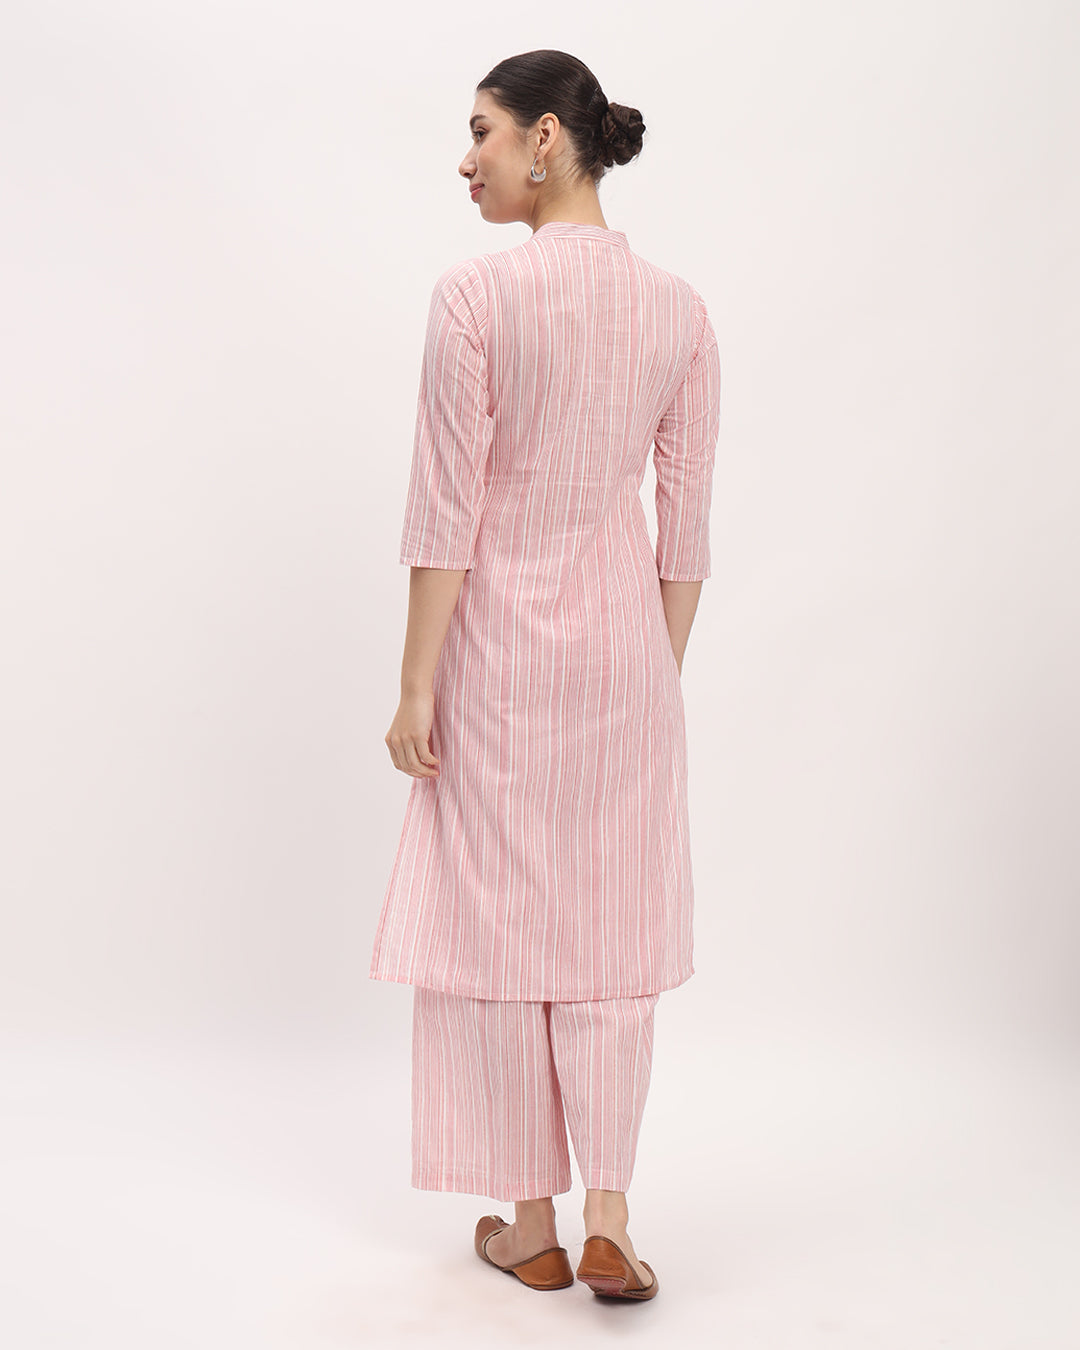 Pink Chic Lines High-Low Printed Kurta (Without Bottoms)